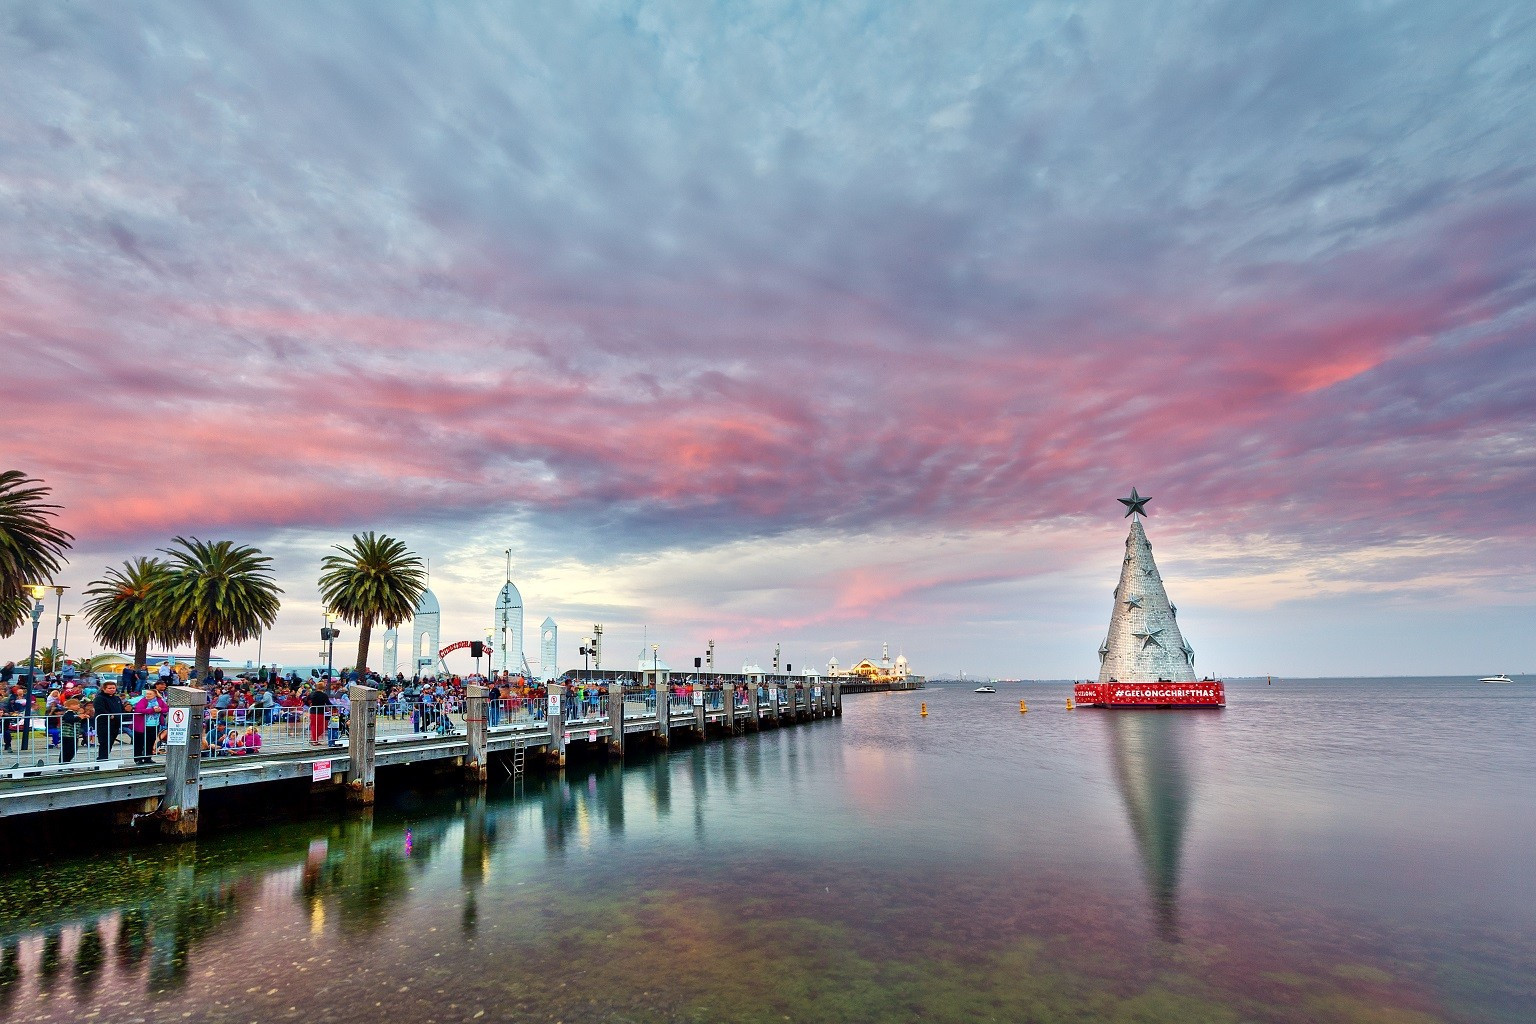 Geelong is set to be among cities in Victoria that will stage events during the 2026 Commonwealth Games ©City of Geelong